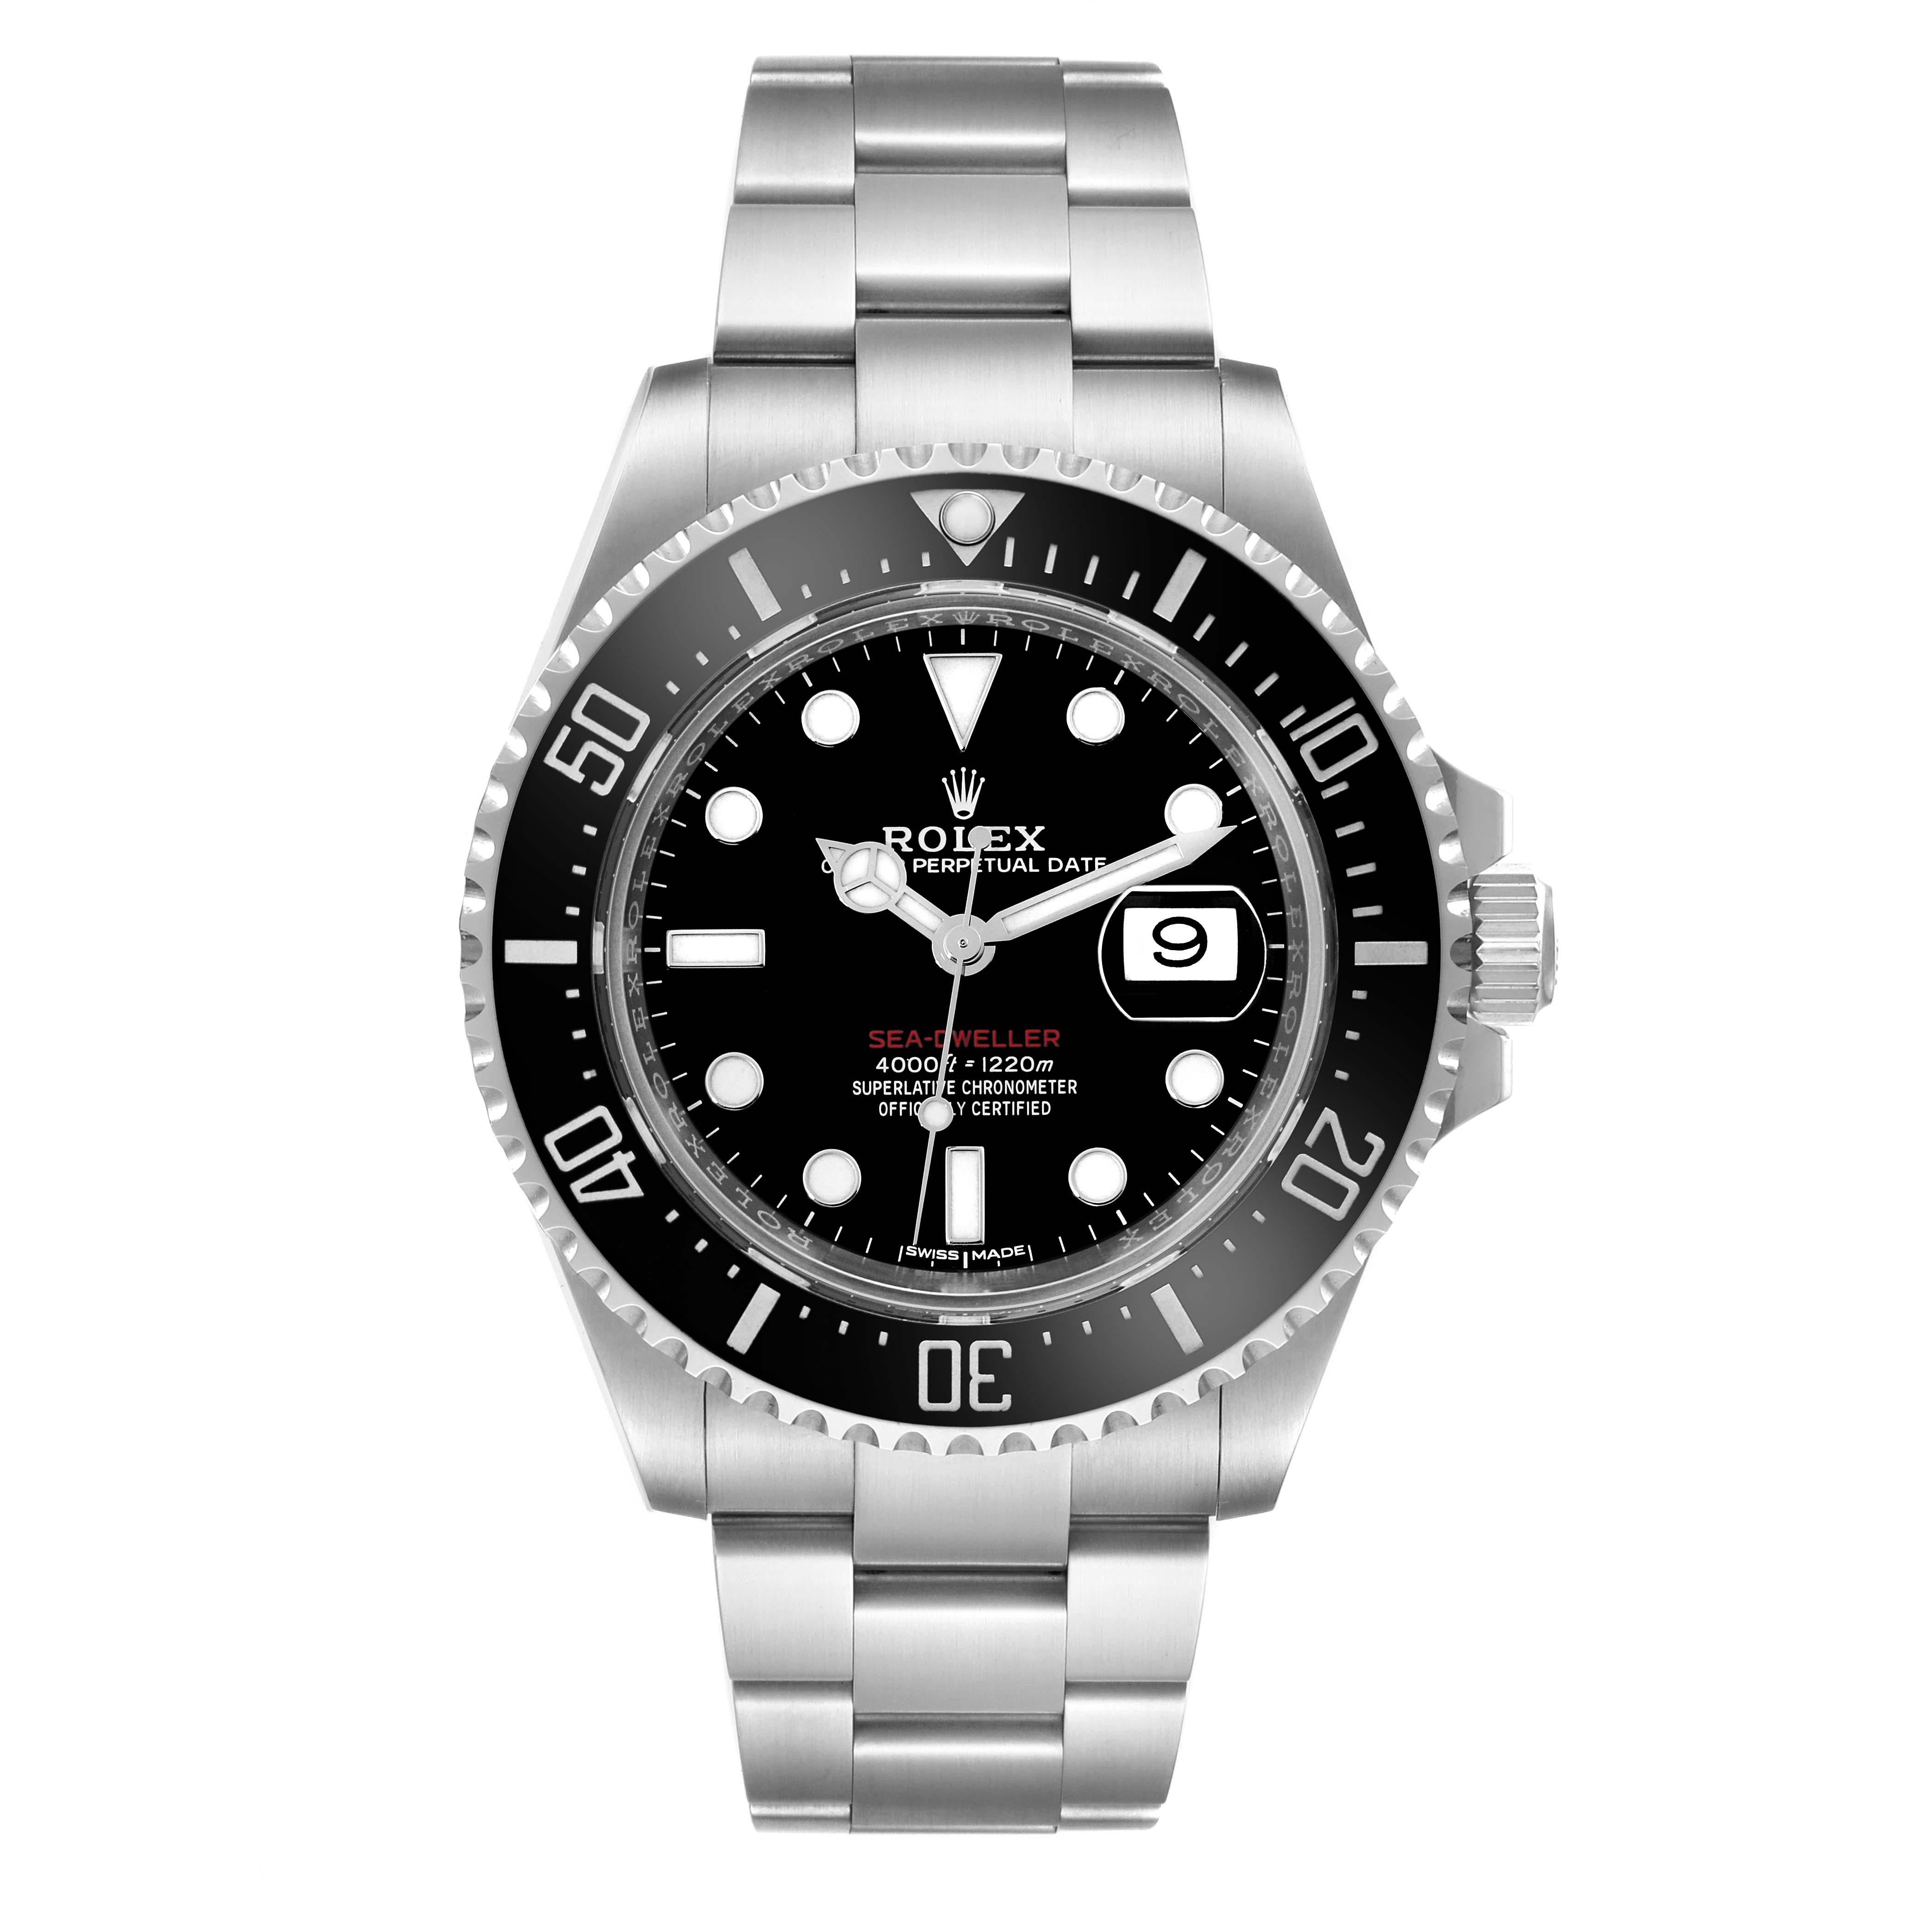 Rolex Seadweller 43mm 50th Anniversary Steel Mens Watch 126600 Box Card. Officially certified chronometer automatic self-winding movement. Stainless steel oyster case 43 mm in diameter. Rolex logo on the crown. Black ceramic unidirectional rotating